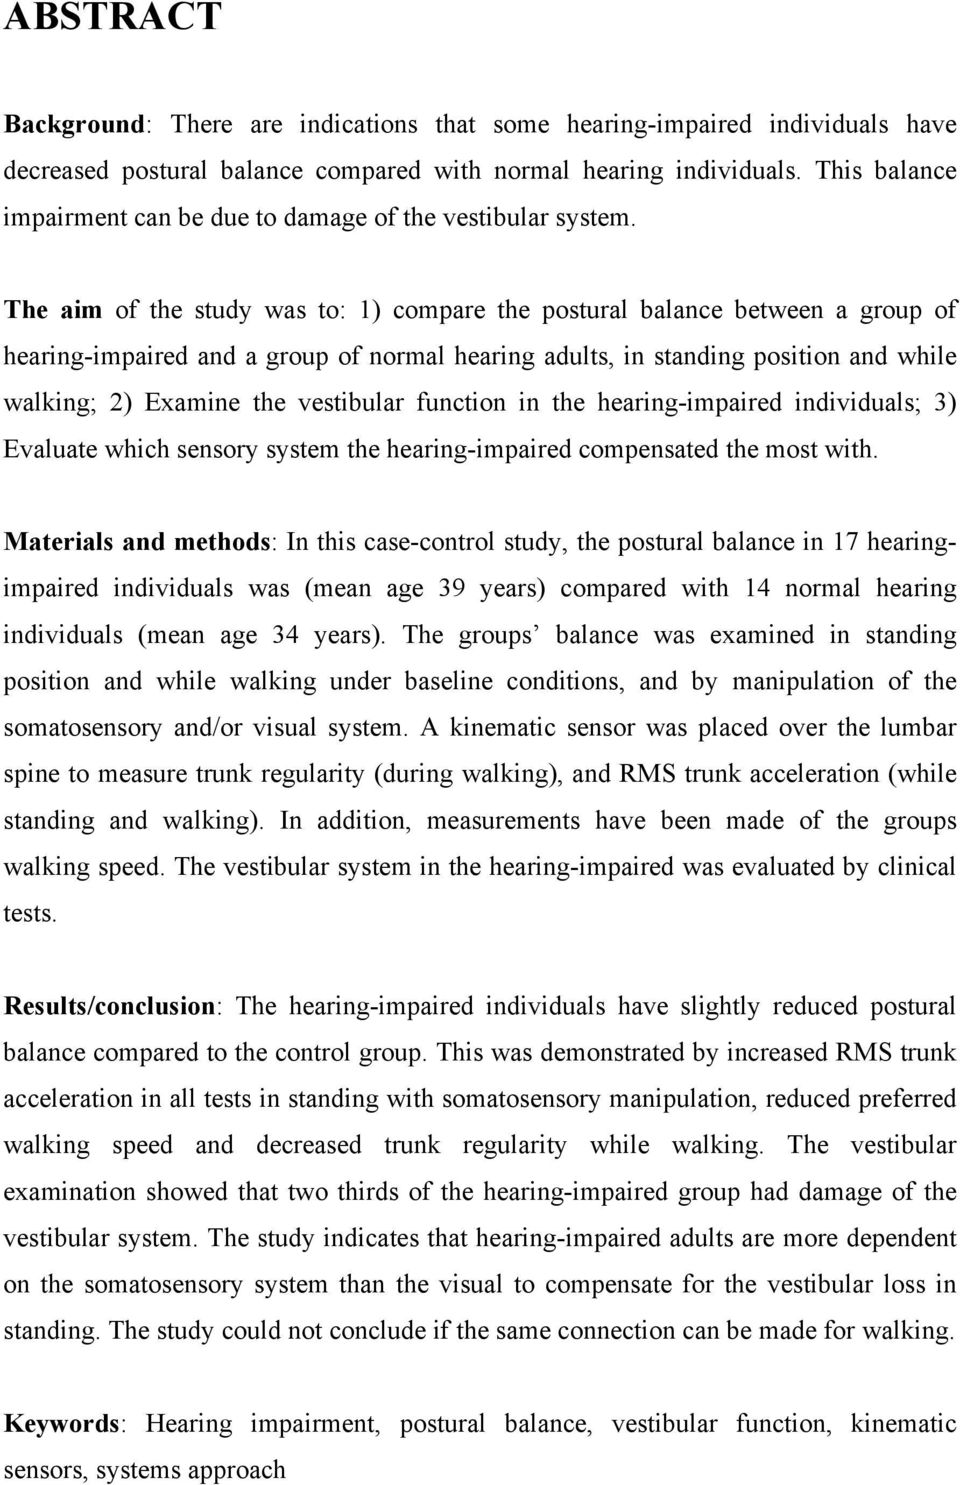 The aim of the study was to: 1) compare the postural balance between a group of hearing-impaired and a group of normal hearing adults, in standing position and while walking; 2) Examine the